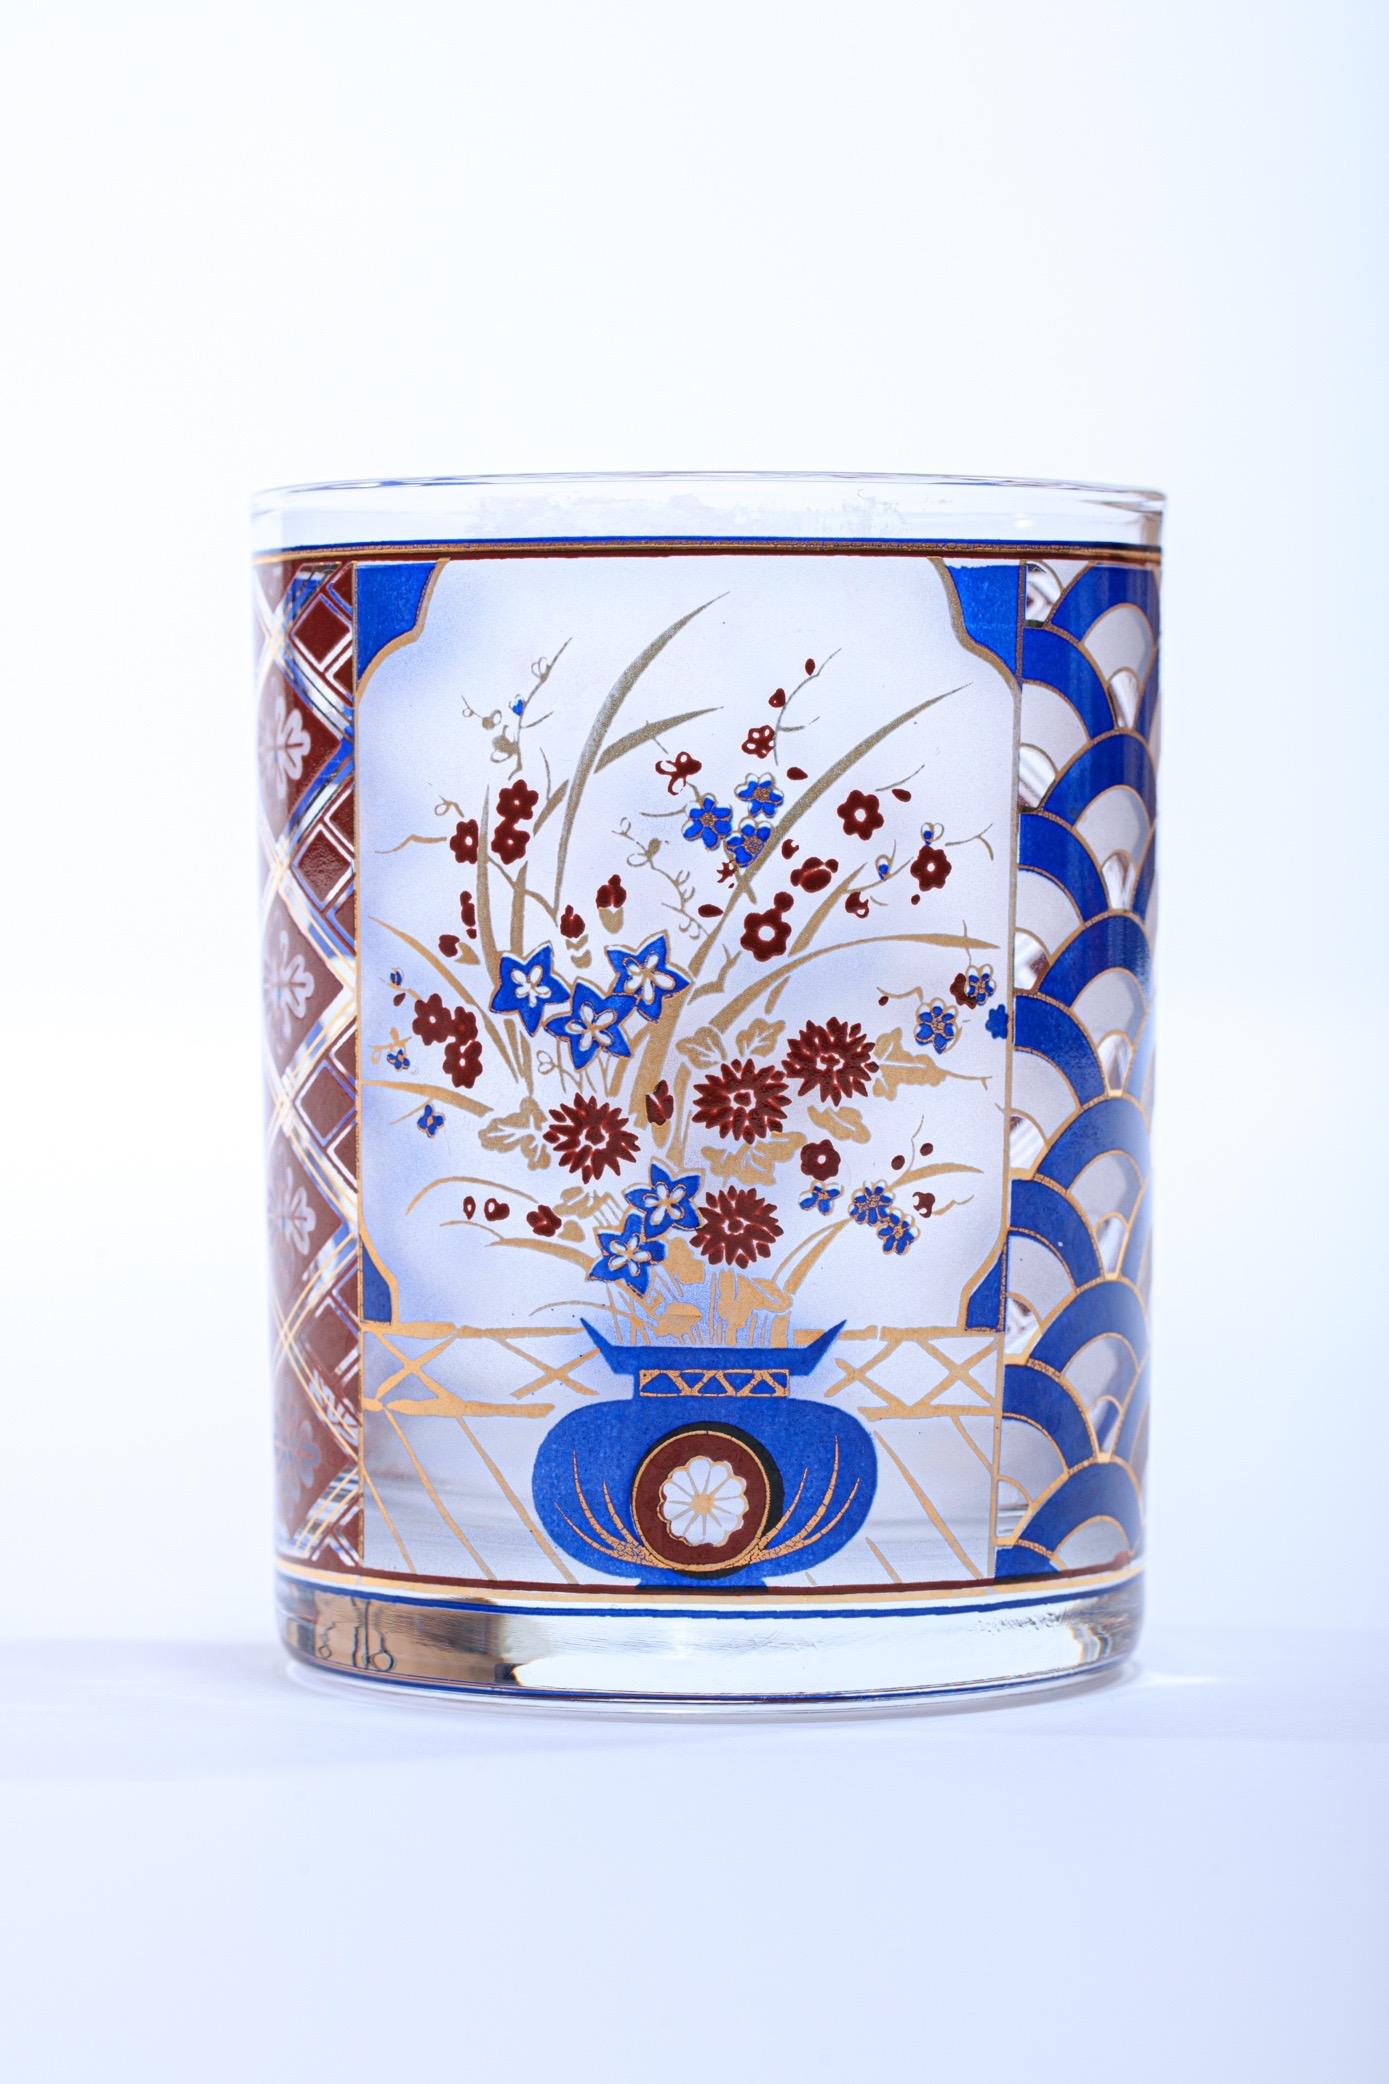 Vintage and rare rocks glasses by Culver in a delicate Chinoiserie pattern featuring 22-karat gold plating. Beautiful and unique addition for display on your bar cart or formal bar. Want to see more beautiful things? Scroll down below and click